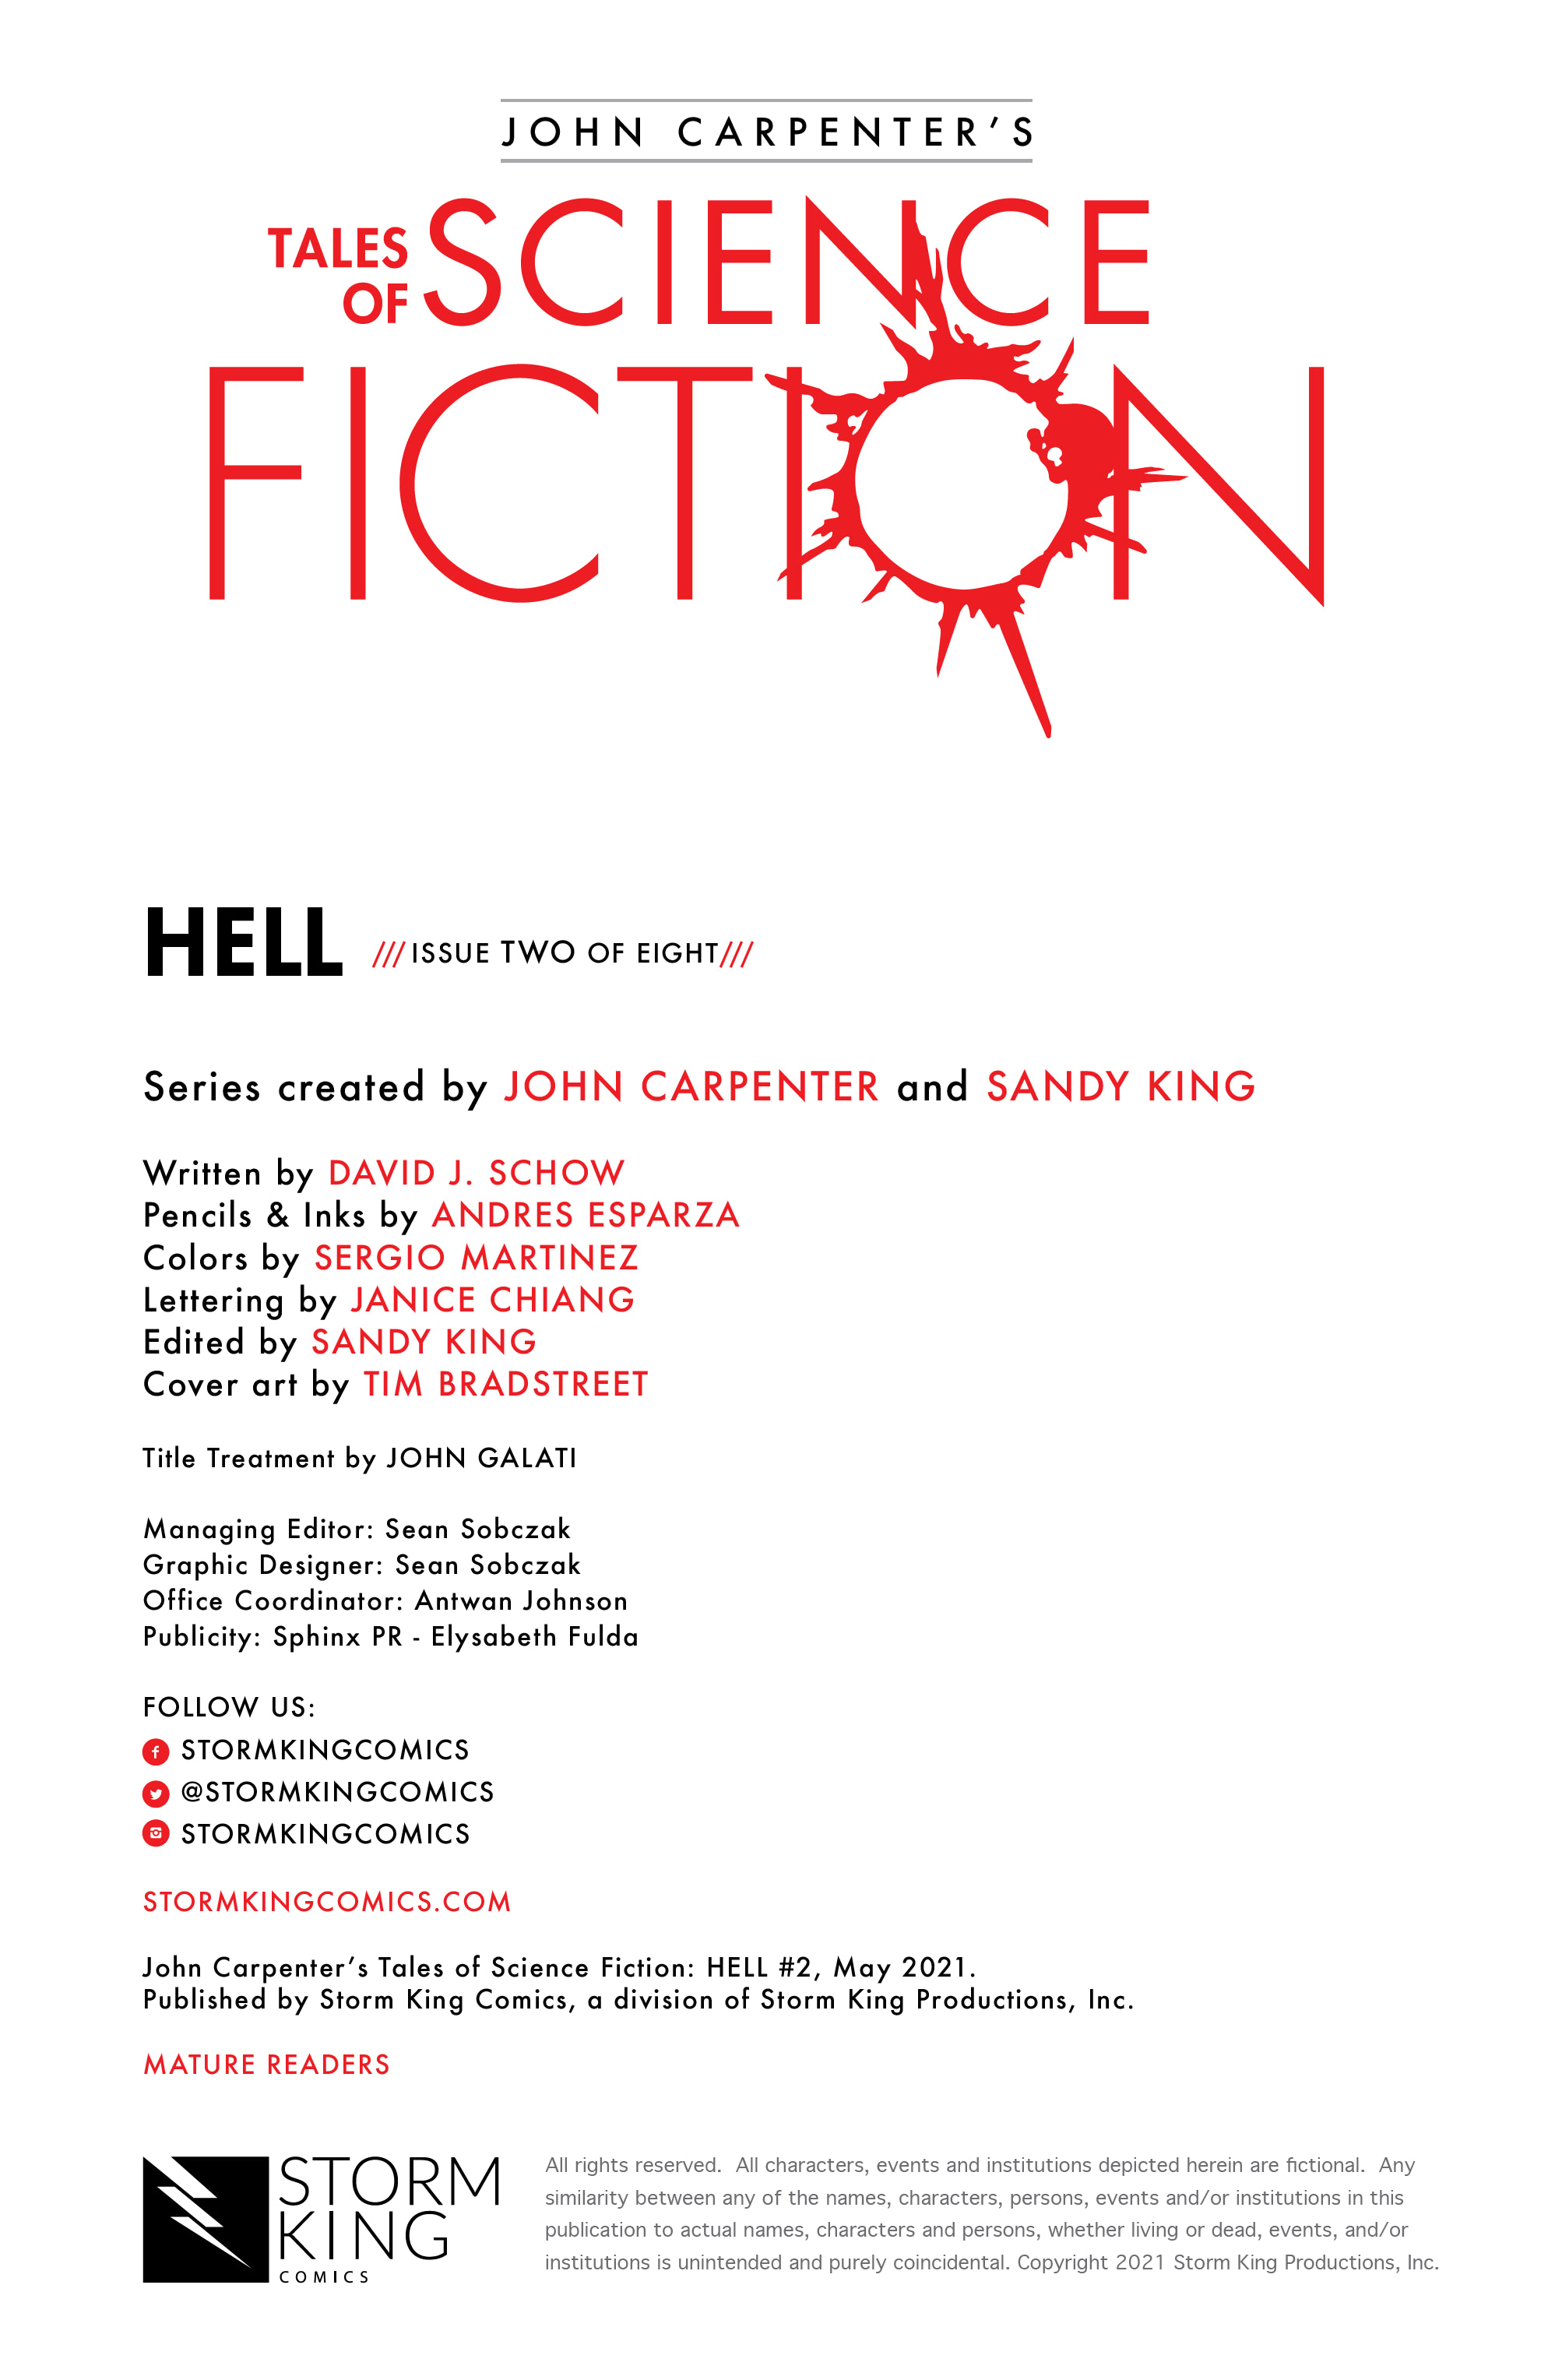 Read online John Carpenter's Tales of Science Fiction: HELL comic -  Issue #2 - 2